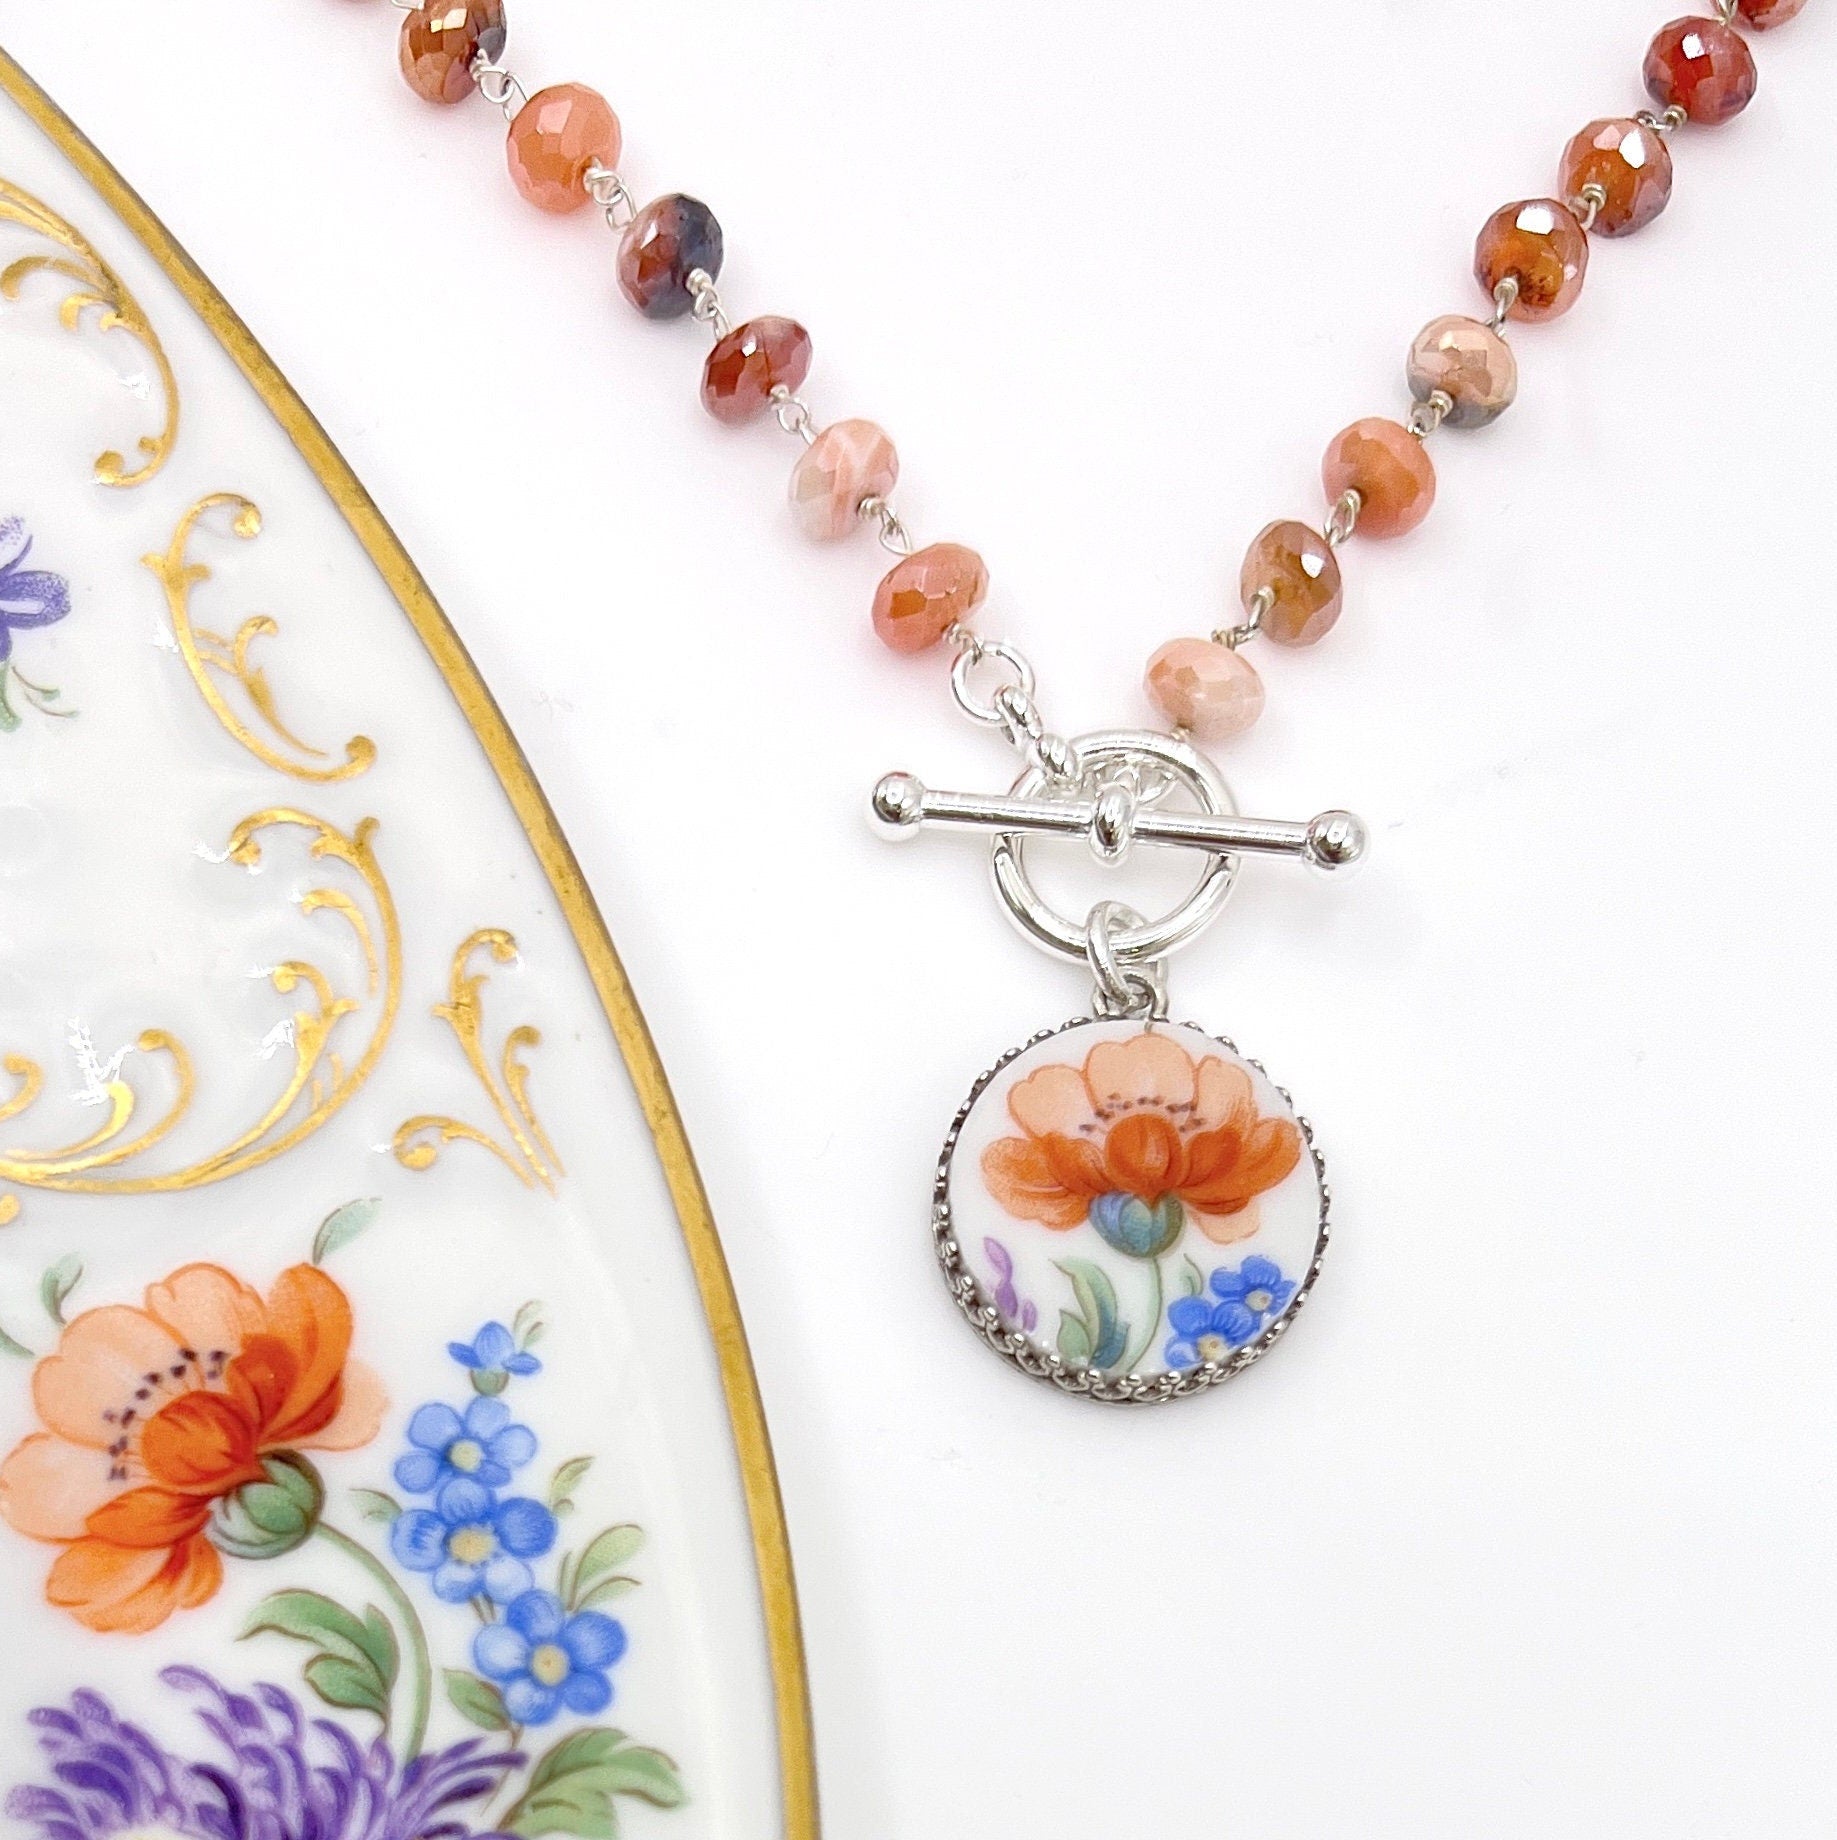 Orange Poppy Toggle Necklace, Broken China Jewelry, Unique 20th Anniversary Gifts for Wife, Carnelian Gemstone Necklace, Poppy Flower